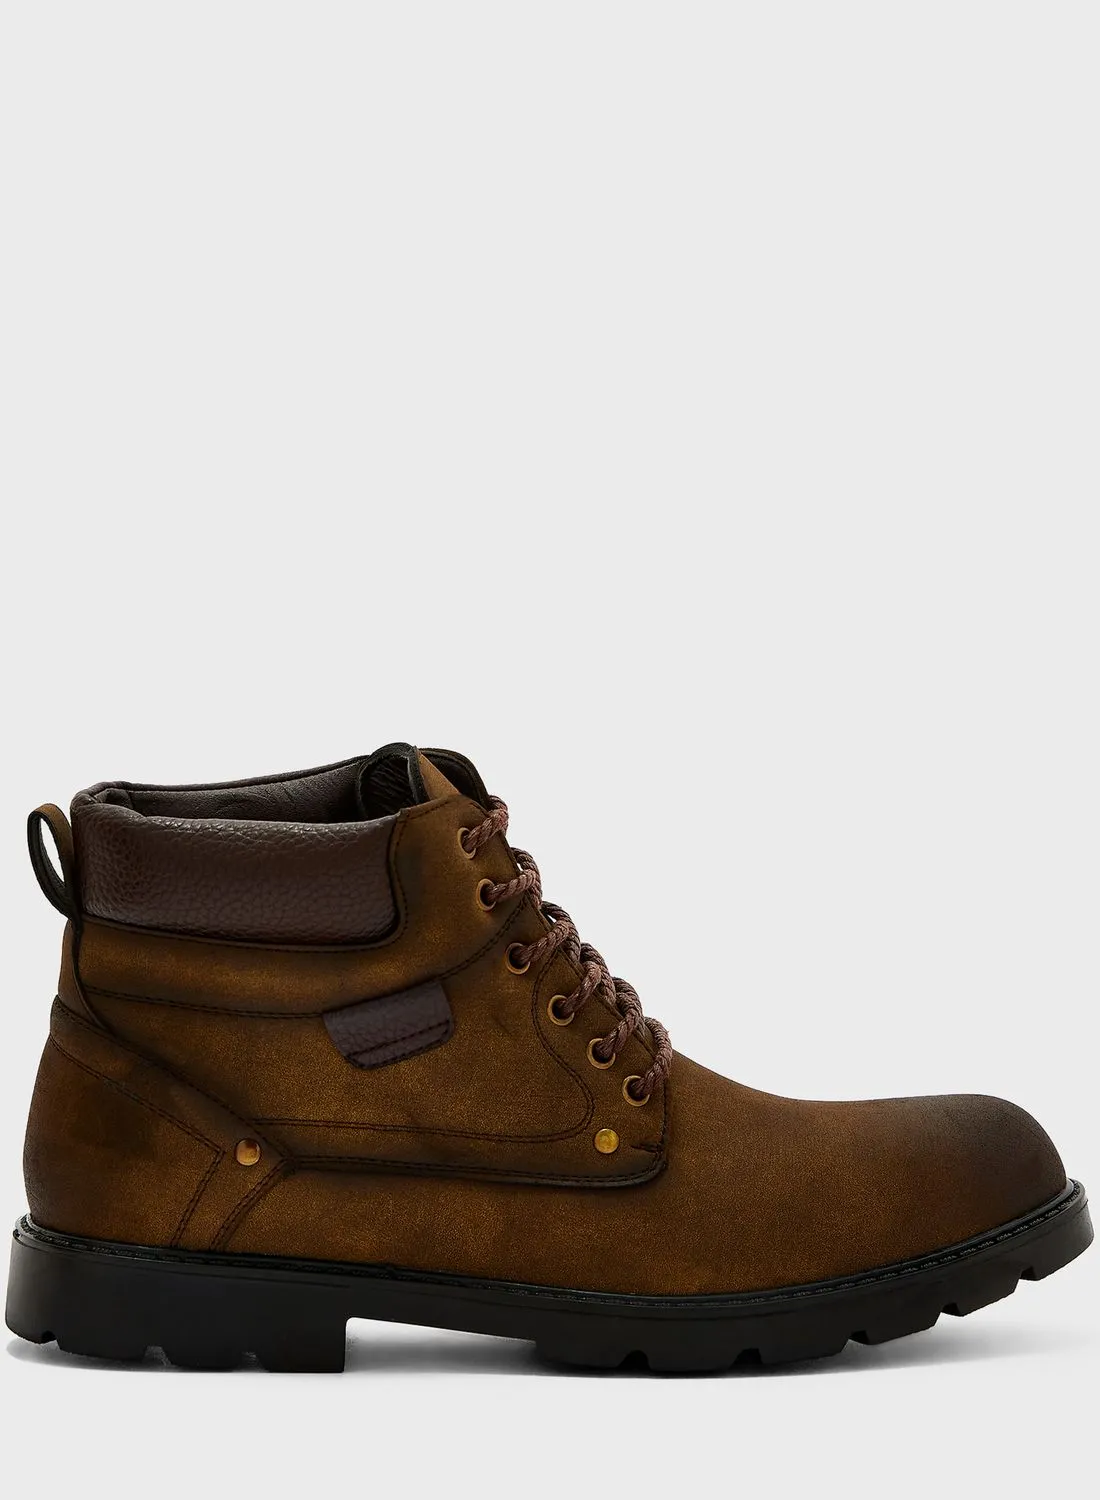 Seventy Five Casual Utility Boots